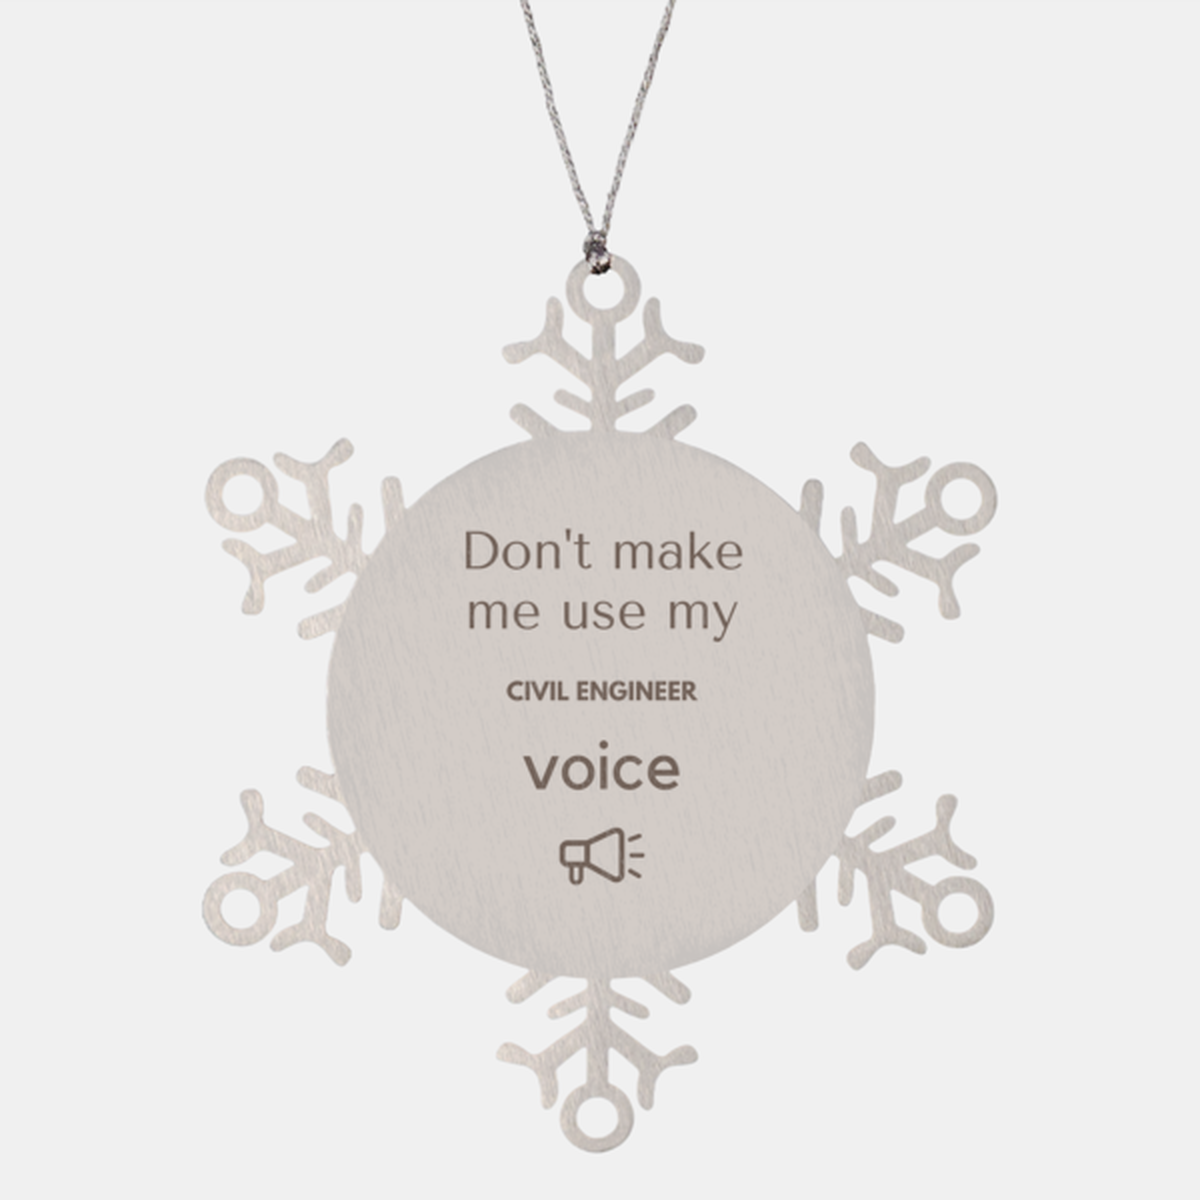 Don't make me use my Civil Engineer voice, Sarcasm Civil Engineer Ornament Gifts, Christmas Civil Engineer Snowflake Ornament Unique Gifts For Civil Engineer Coworkers, Men, Women, Colleague, Friends